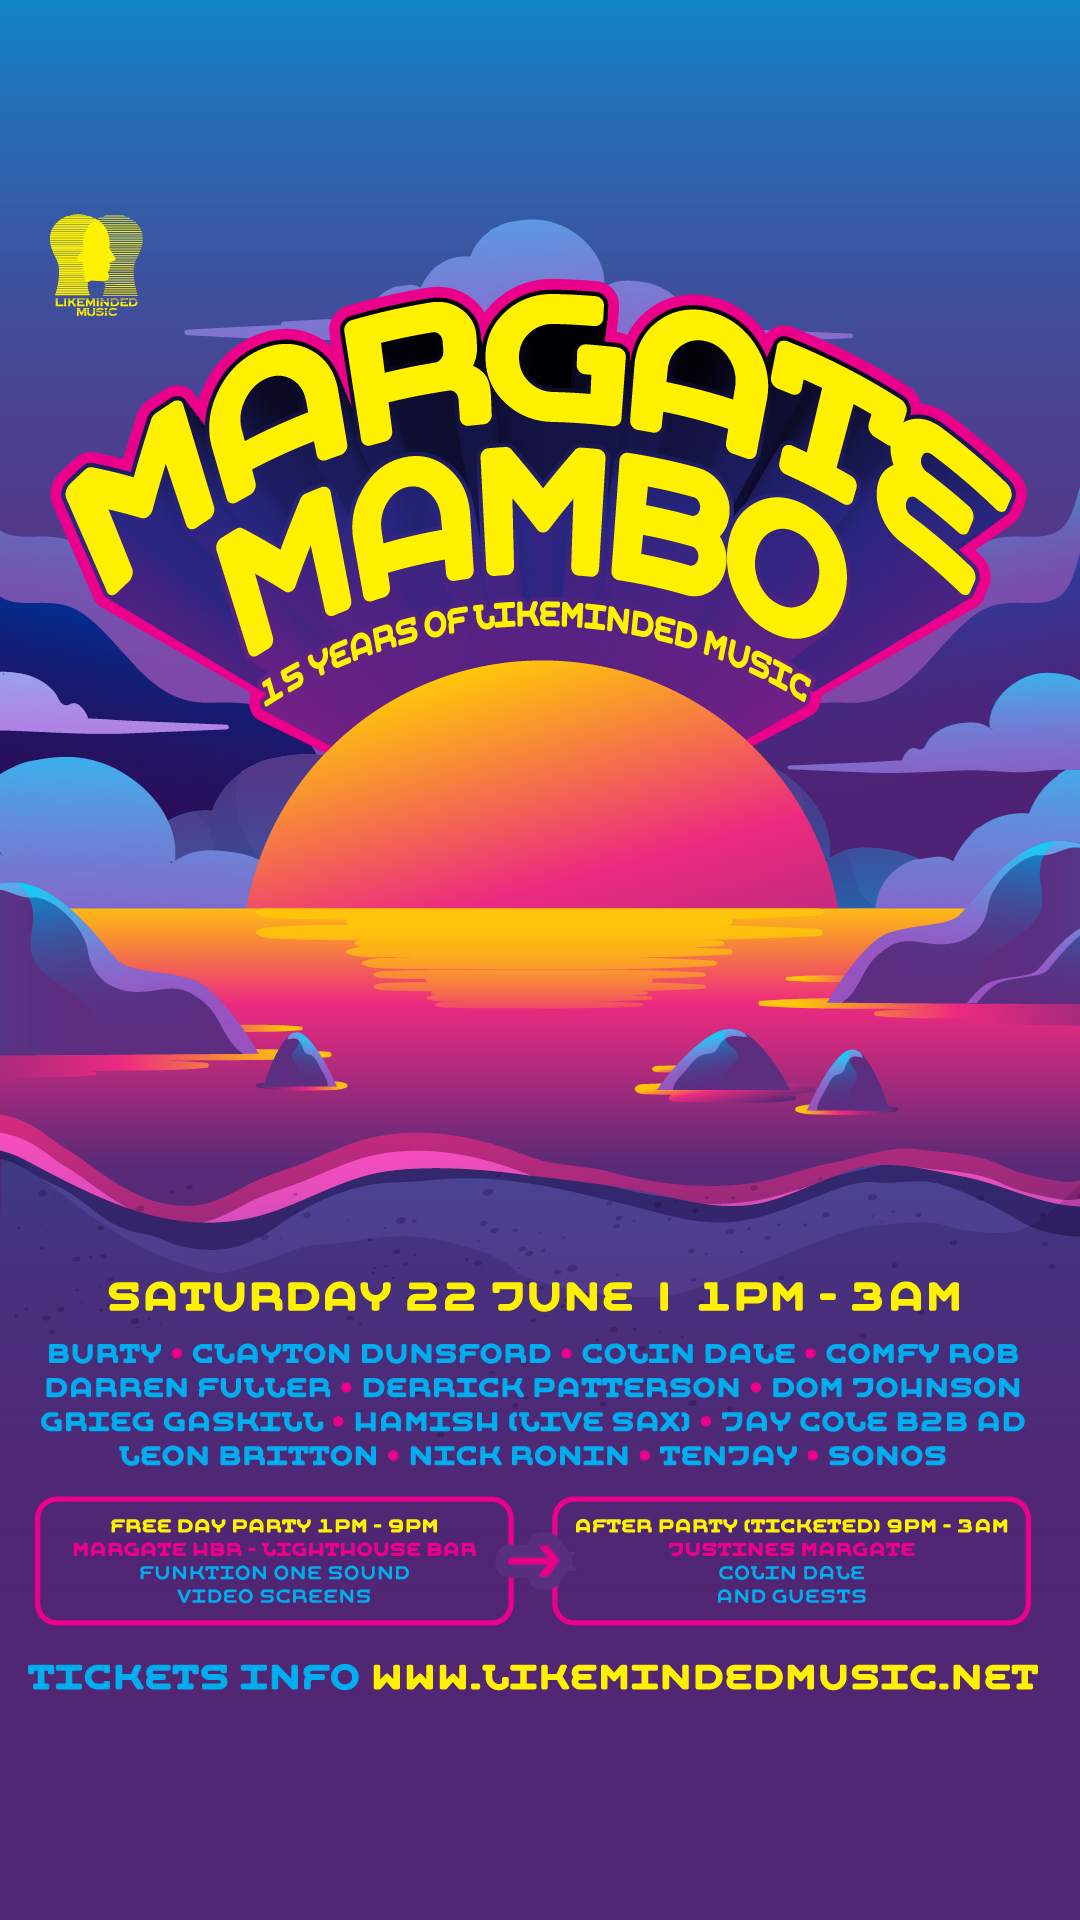 Margate Mambo Afterparty with Colin Dale - 15 Years of Likeminded Music - Página frontal